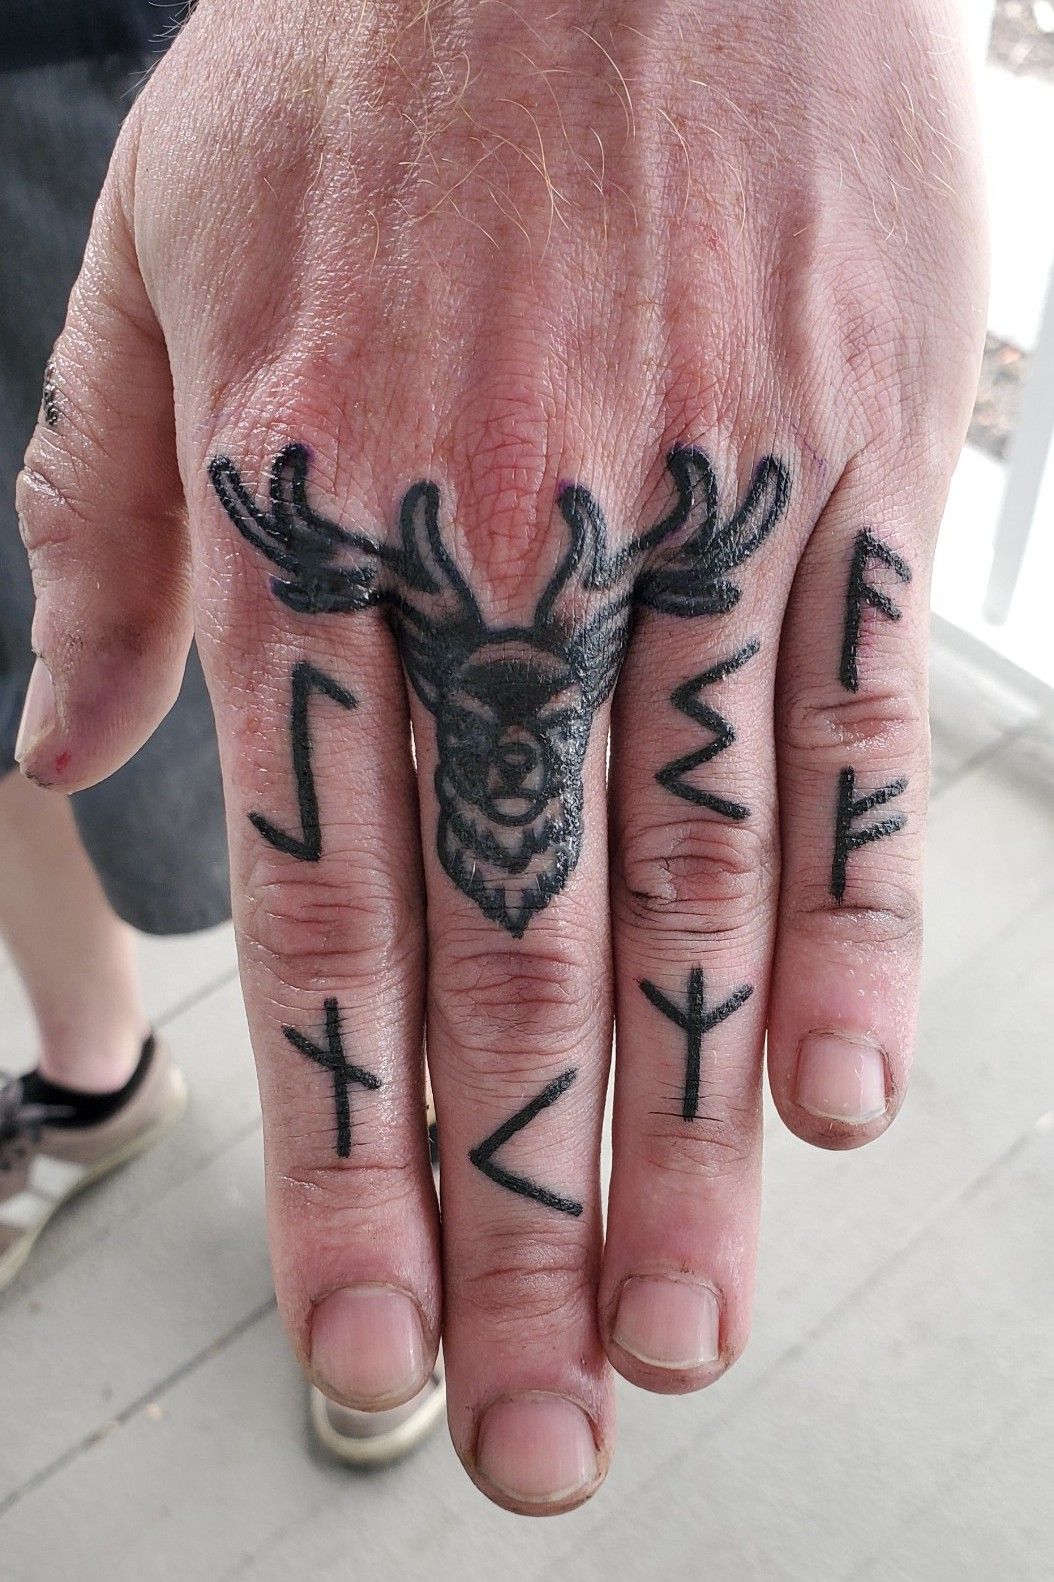 30 cool fingers tattoo ideas for men | small tattoo ideas for men - YouTube